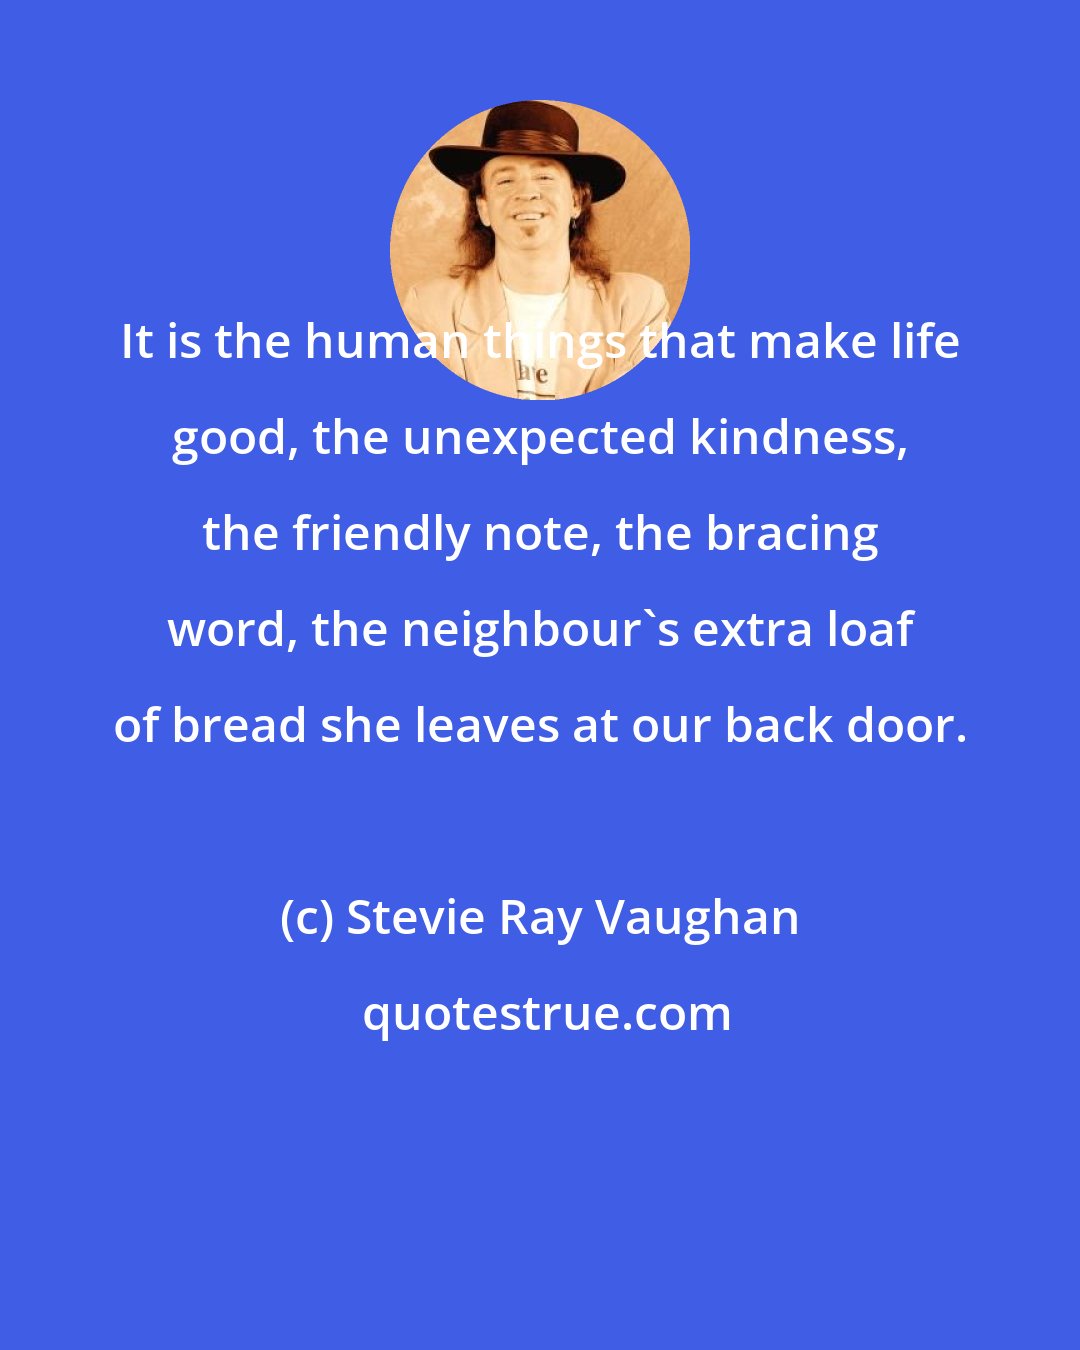 Stevie Ray Vaughan: It is the human things that make life good, the unexpected kindness, the friendly note, the bracing word, the neighbour's extra loaf of bread she leaves at our back door.